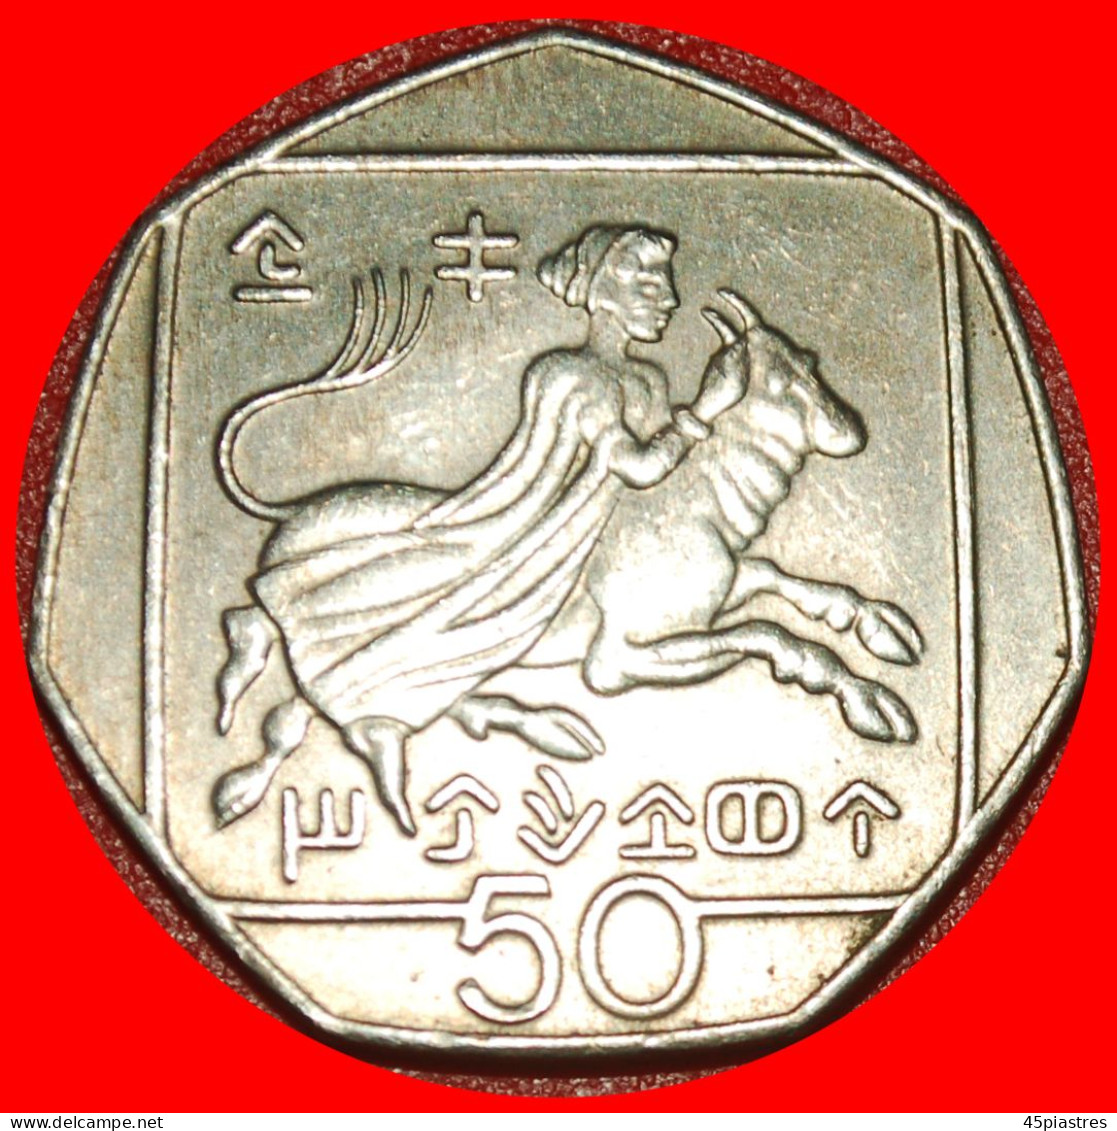 * SLOVAKIA (1991-2004): CYPRUS  50 CENTS 2002 MINT LUSTRE HEPTAGON~ABDUCTION OF EUROPA!· LOW START ·  NO RESERVE! - Cyprus